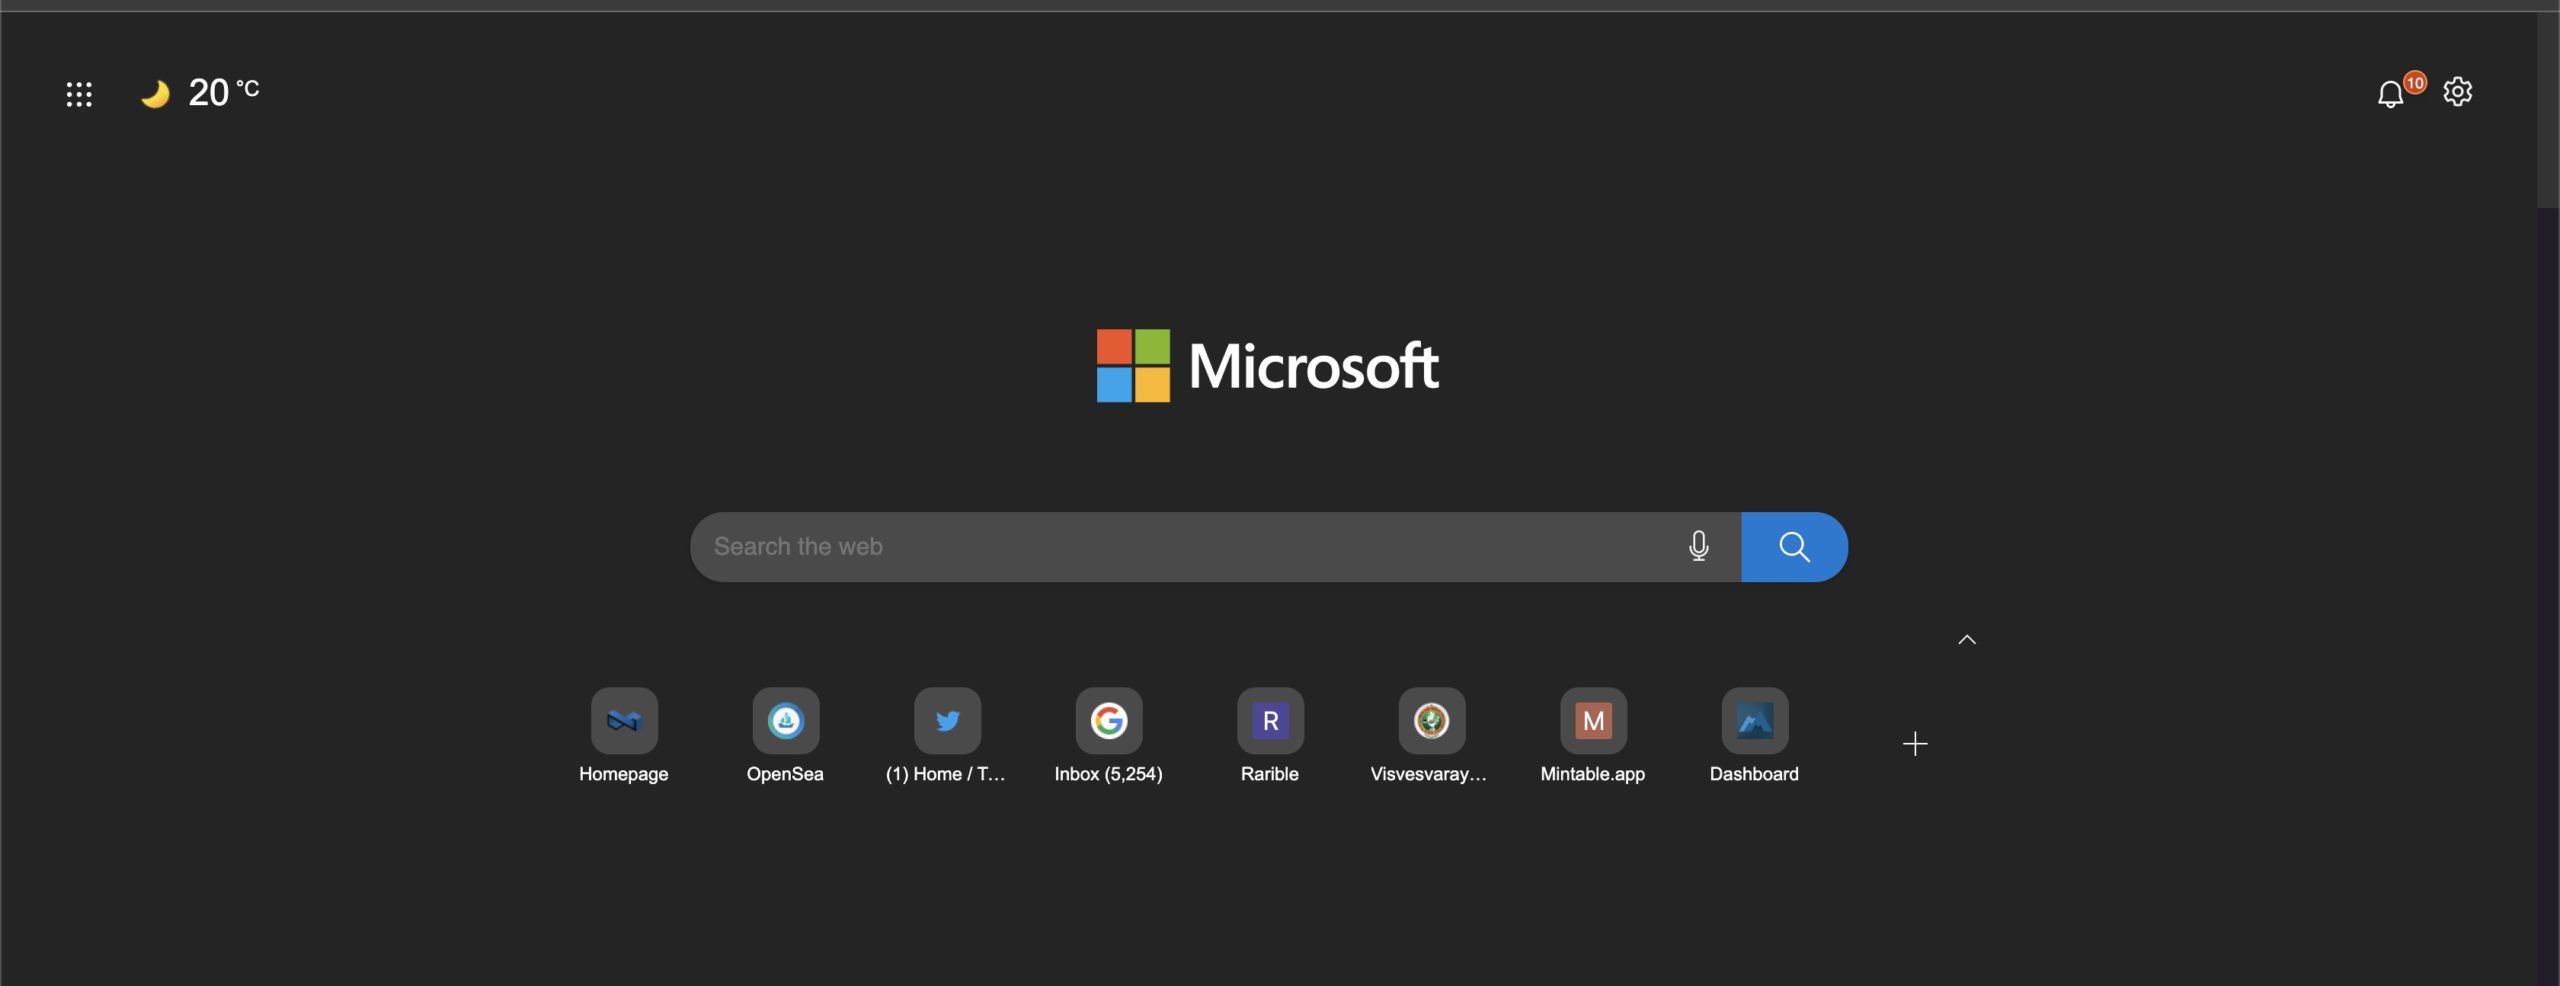 How to check if the Microsoft Edge browser is up to date